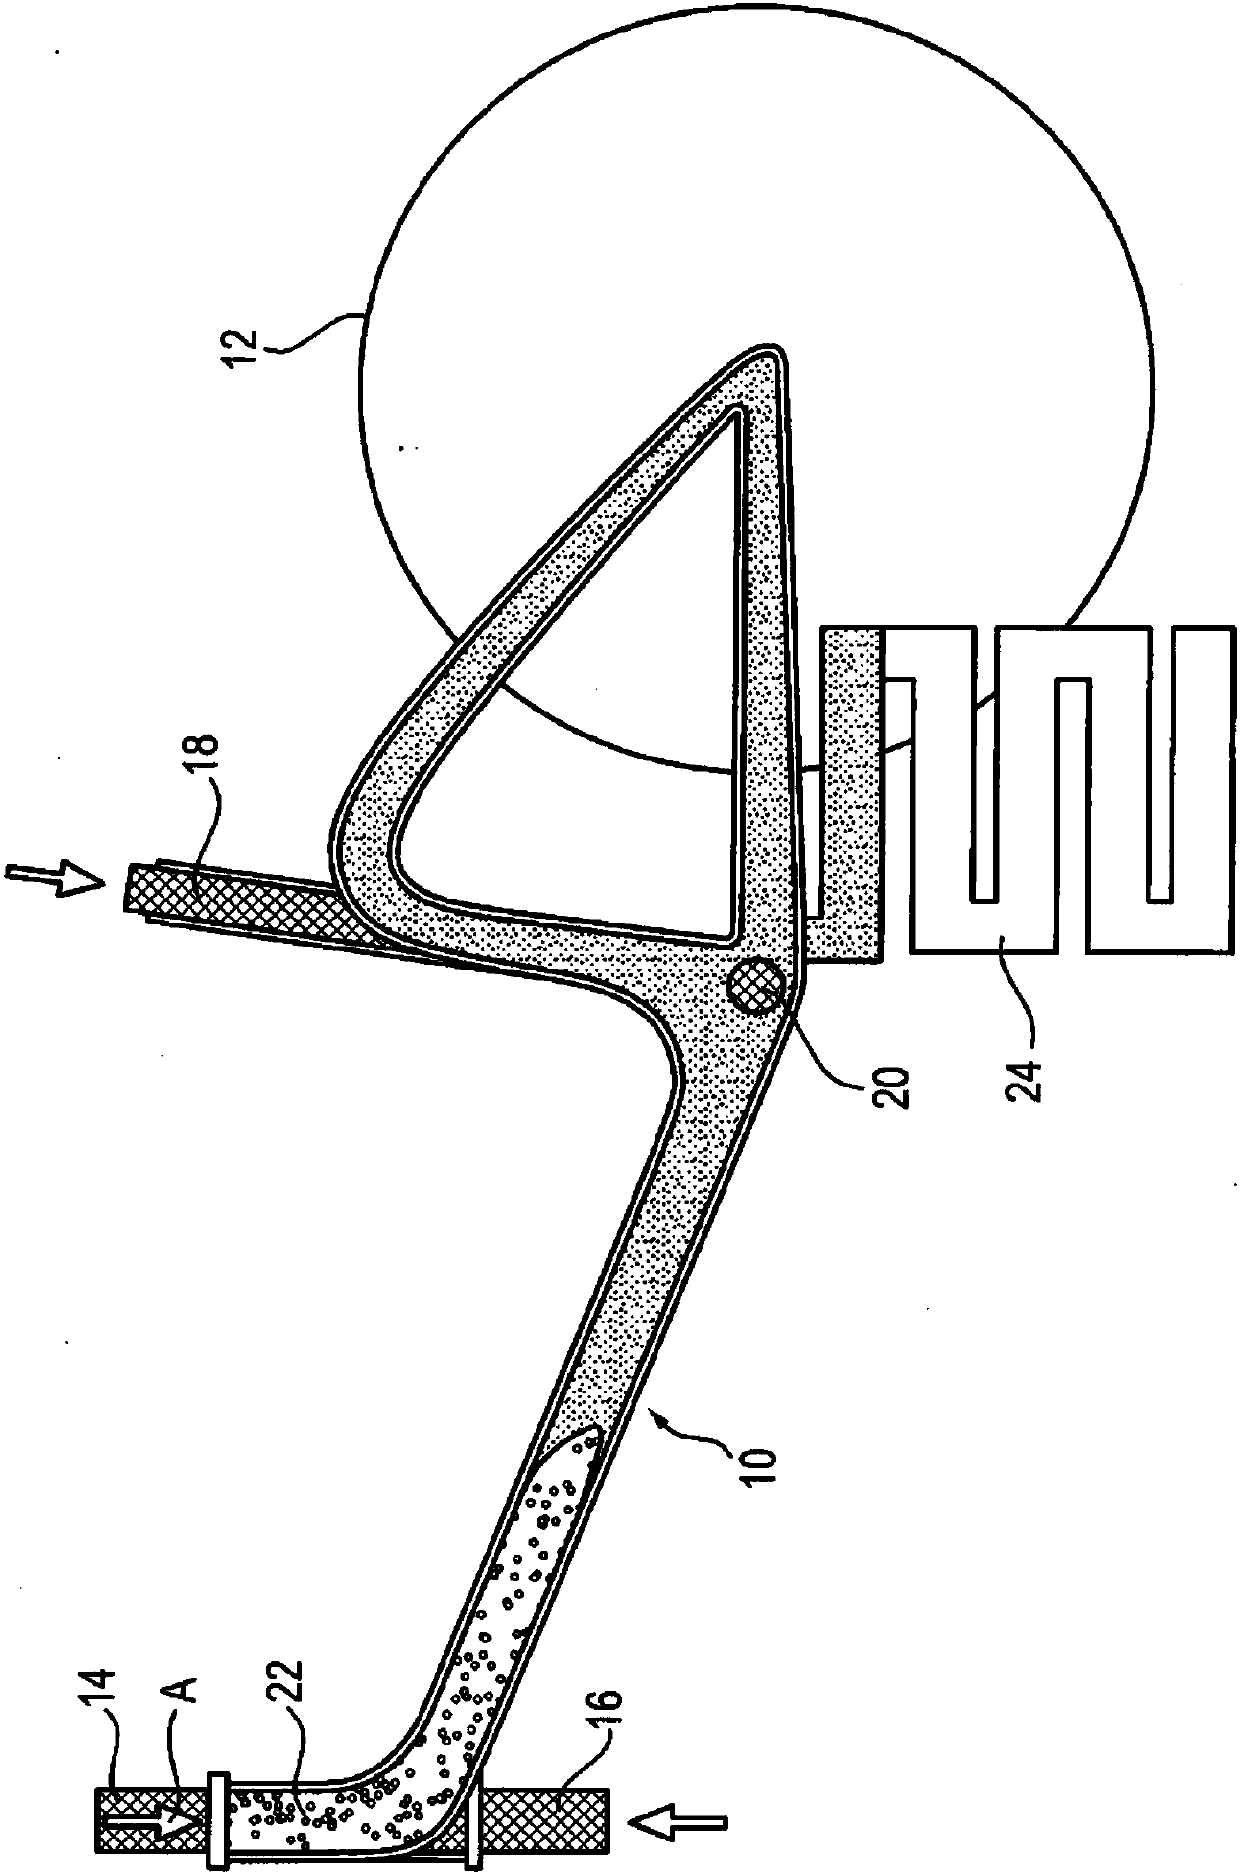 Method for producing a plastic frame for a two-wheeled vehicle